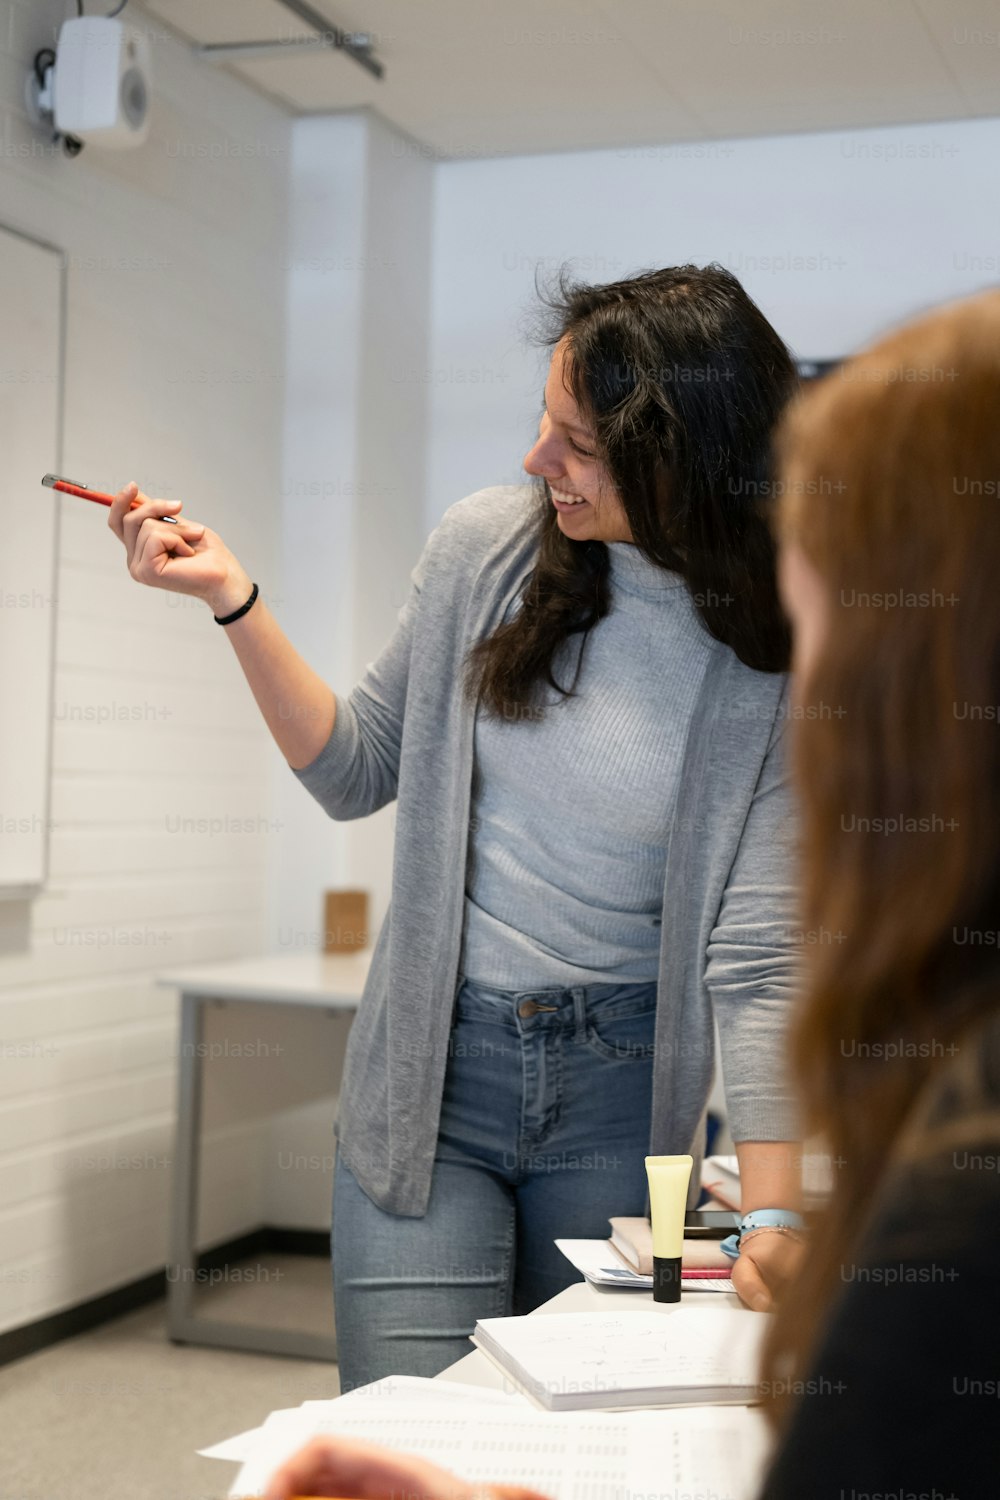 a woman standing in front of a whiteboard pointing at something